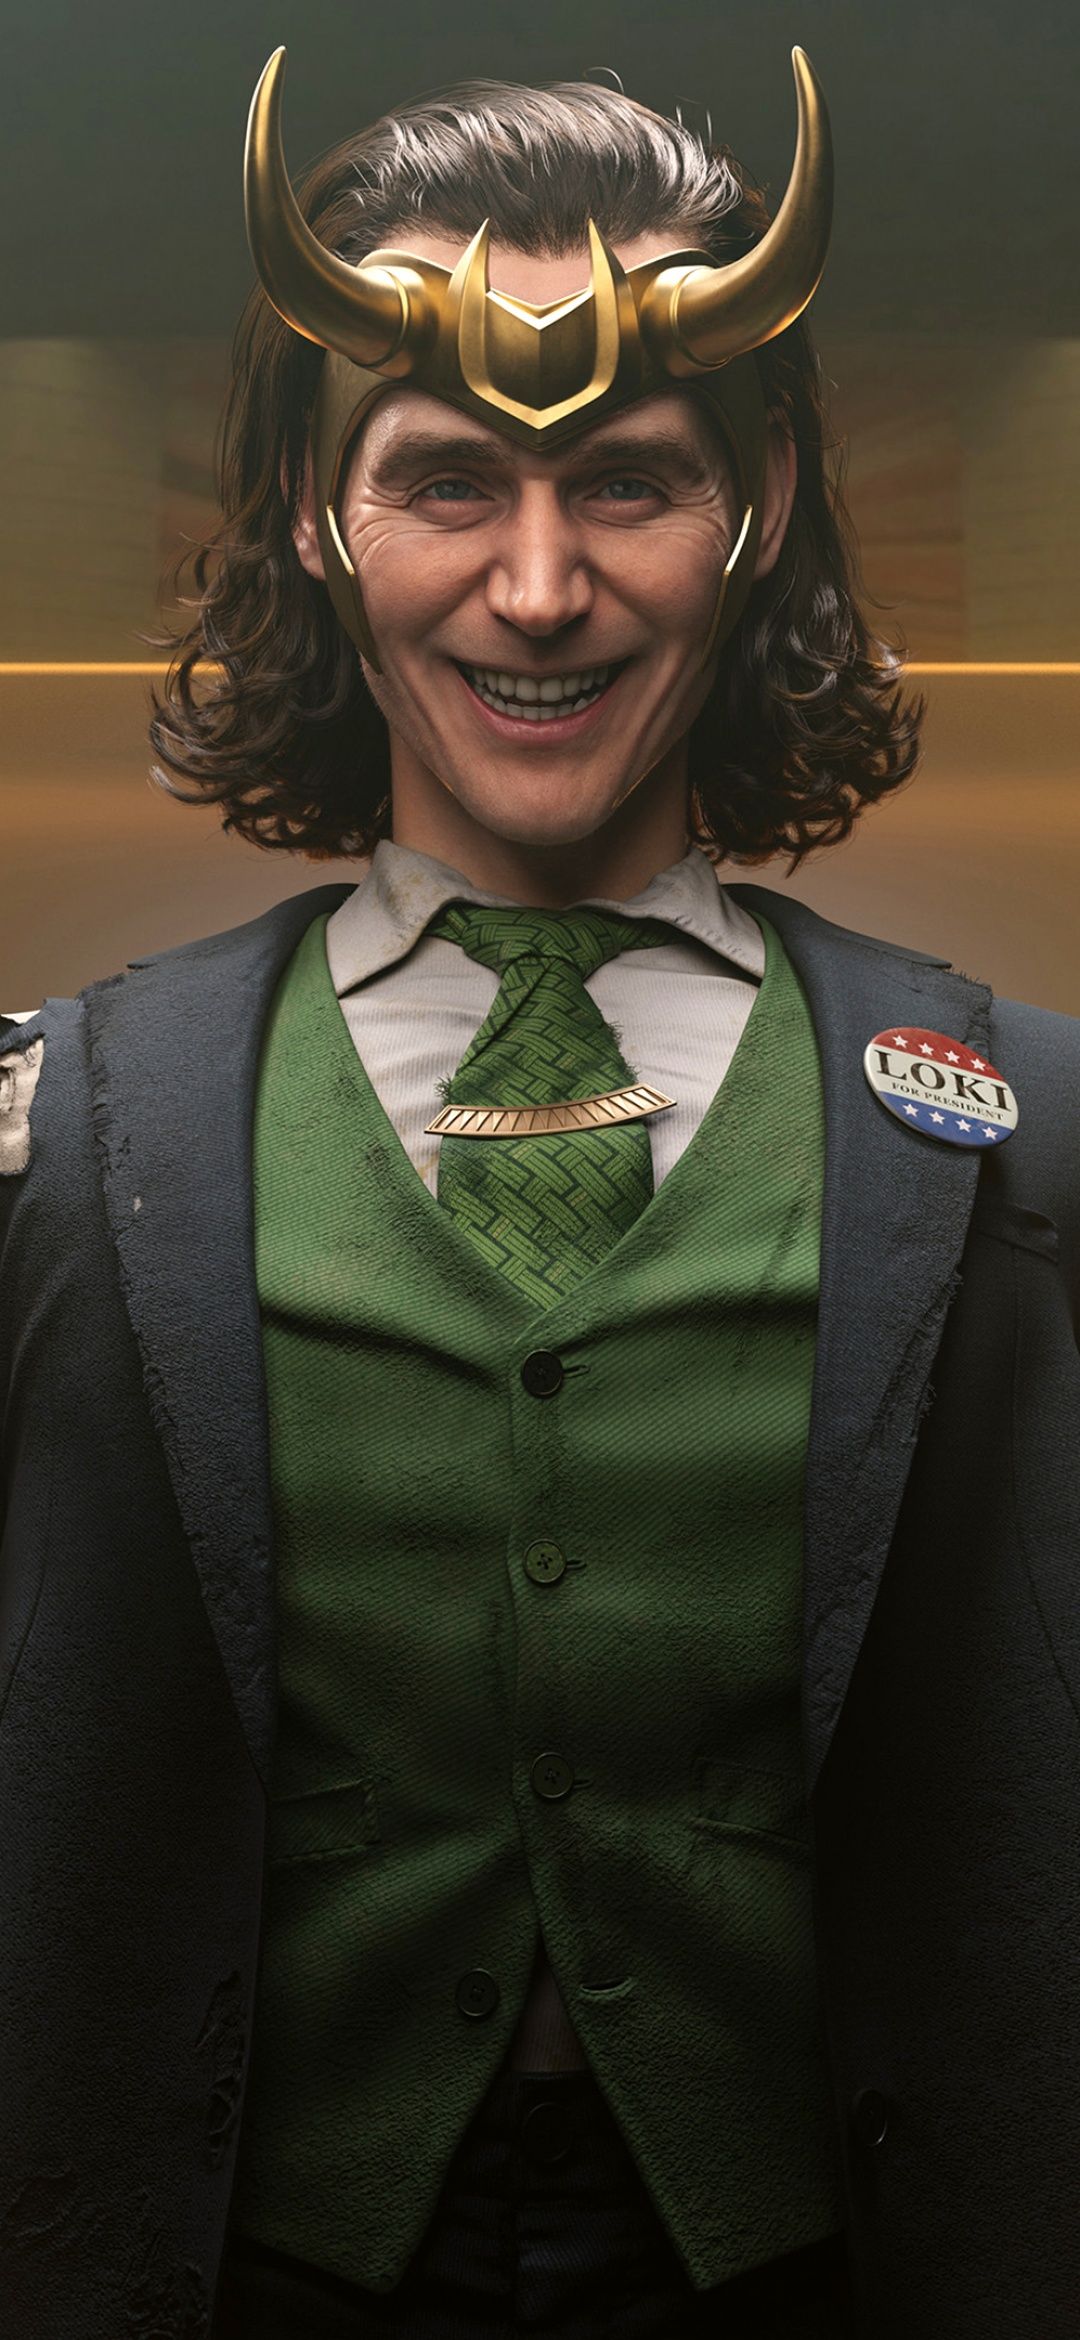 A digital painting of Tom Hiddleston as Loki from the Marvel Cinematic Universe, wearing a green suit, a green tie, and a golden helmet. He has a wide smile on his face and a 